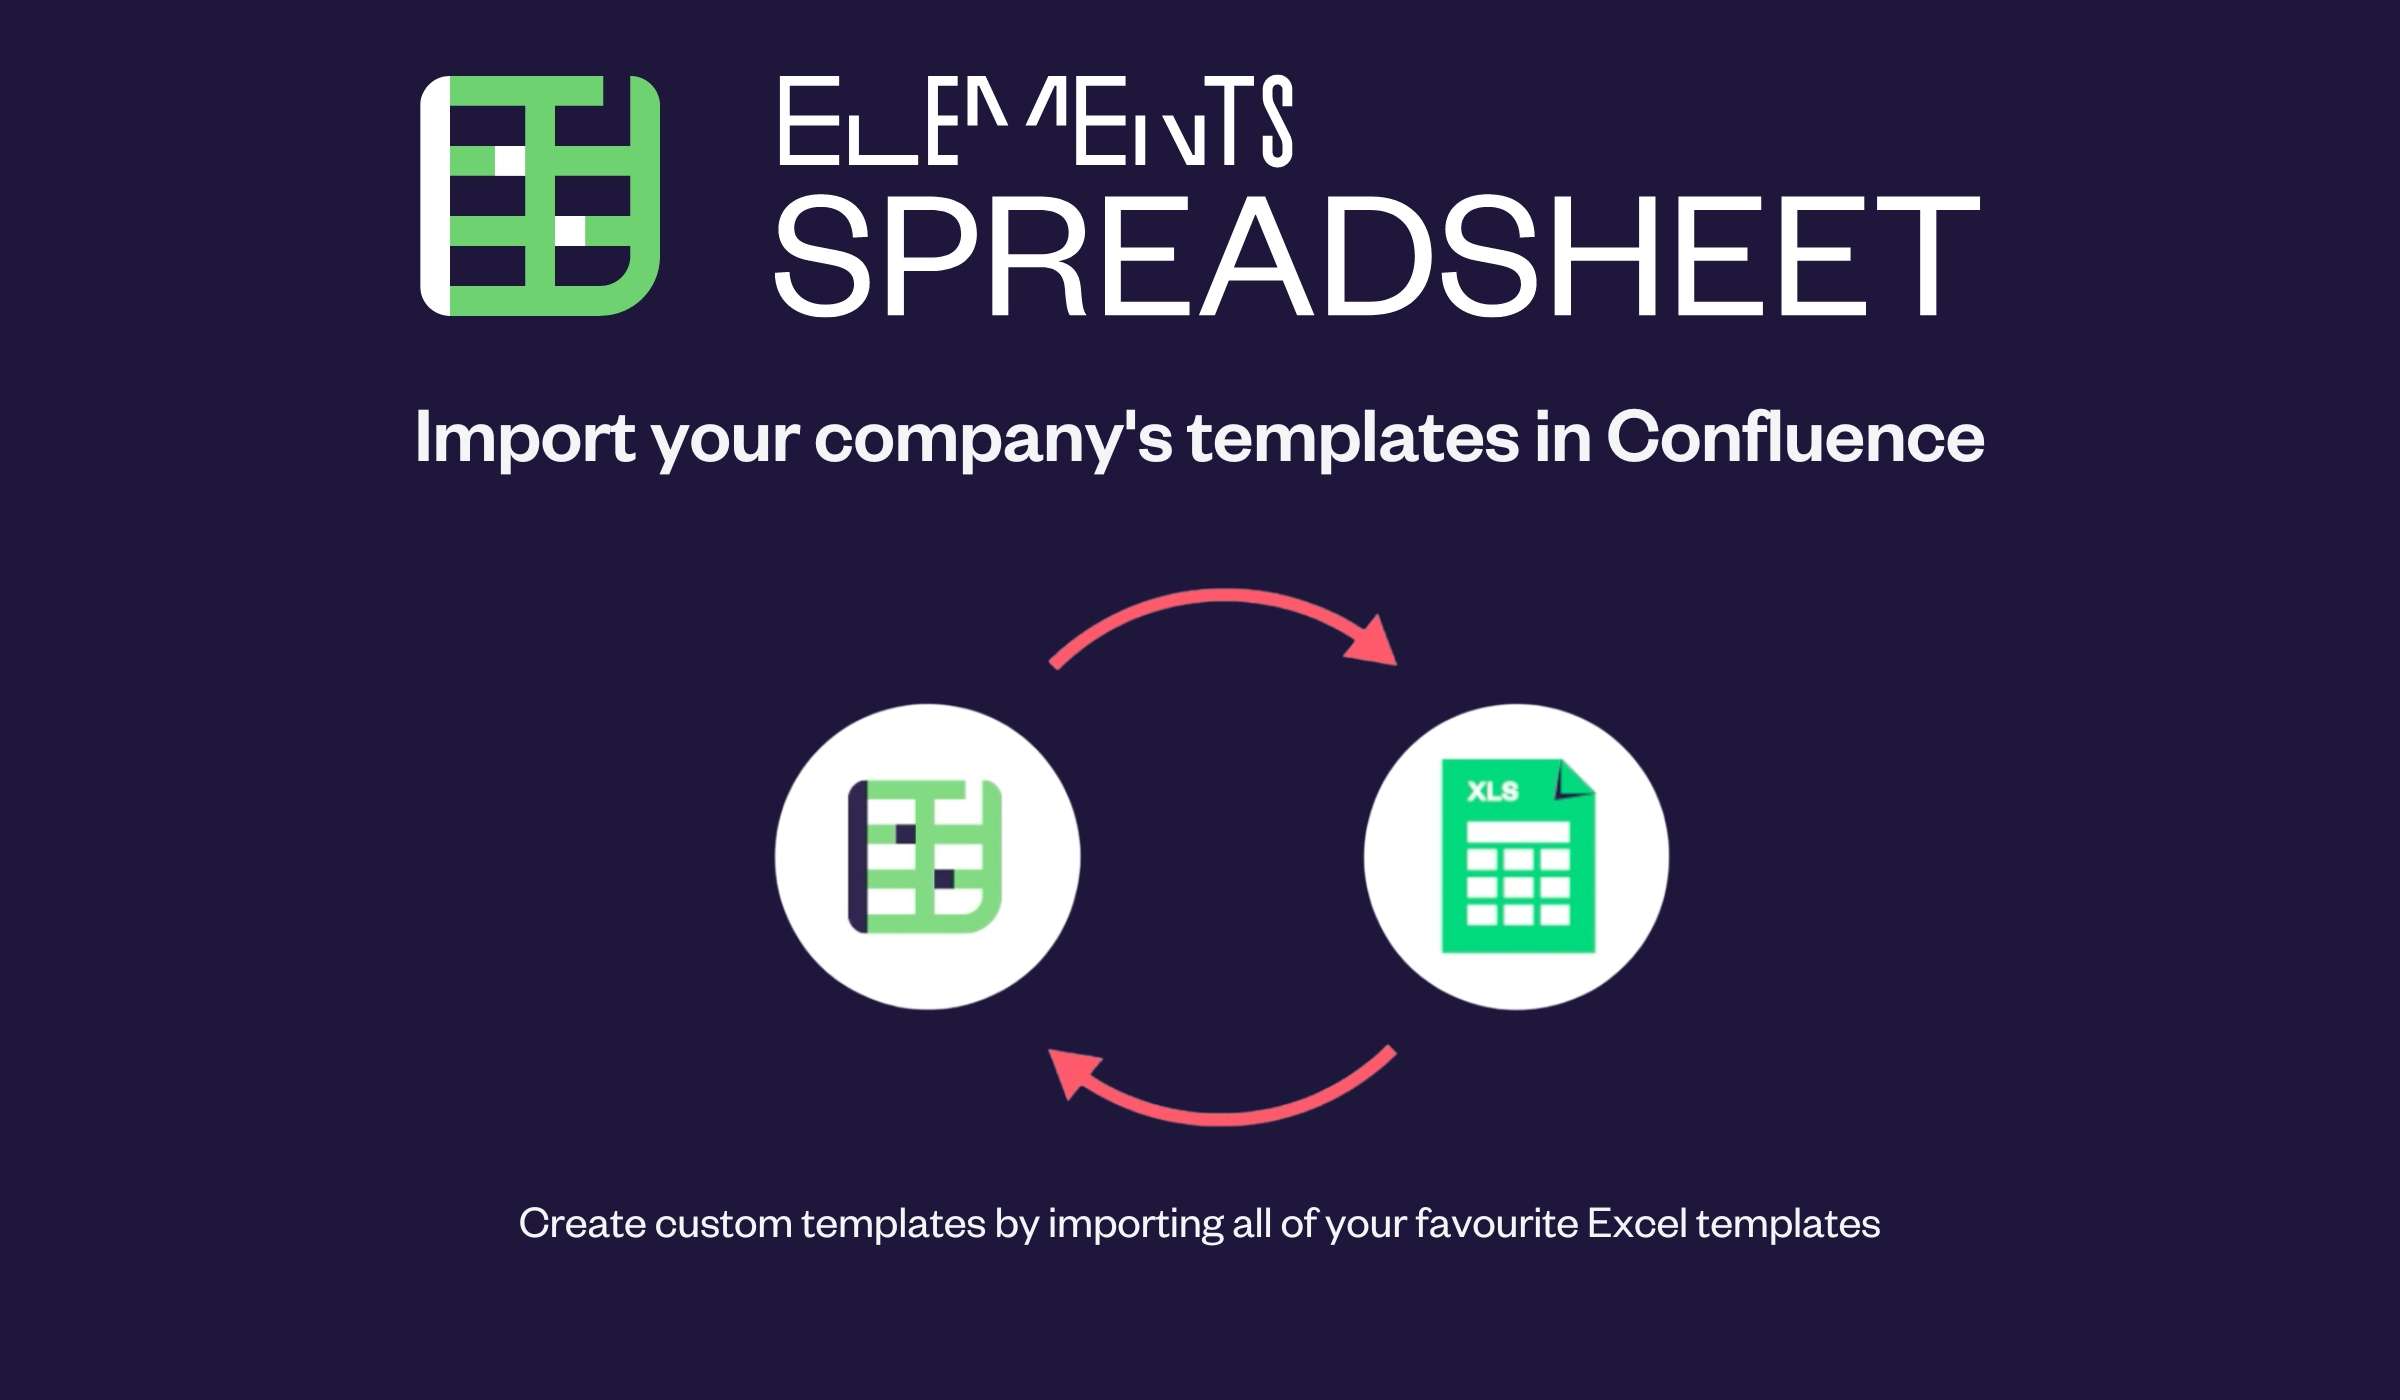 Elements Spreadsheet allows you to create custom templates by importing all of your favourite Excel templates. You'll be up and running in a few clicks!